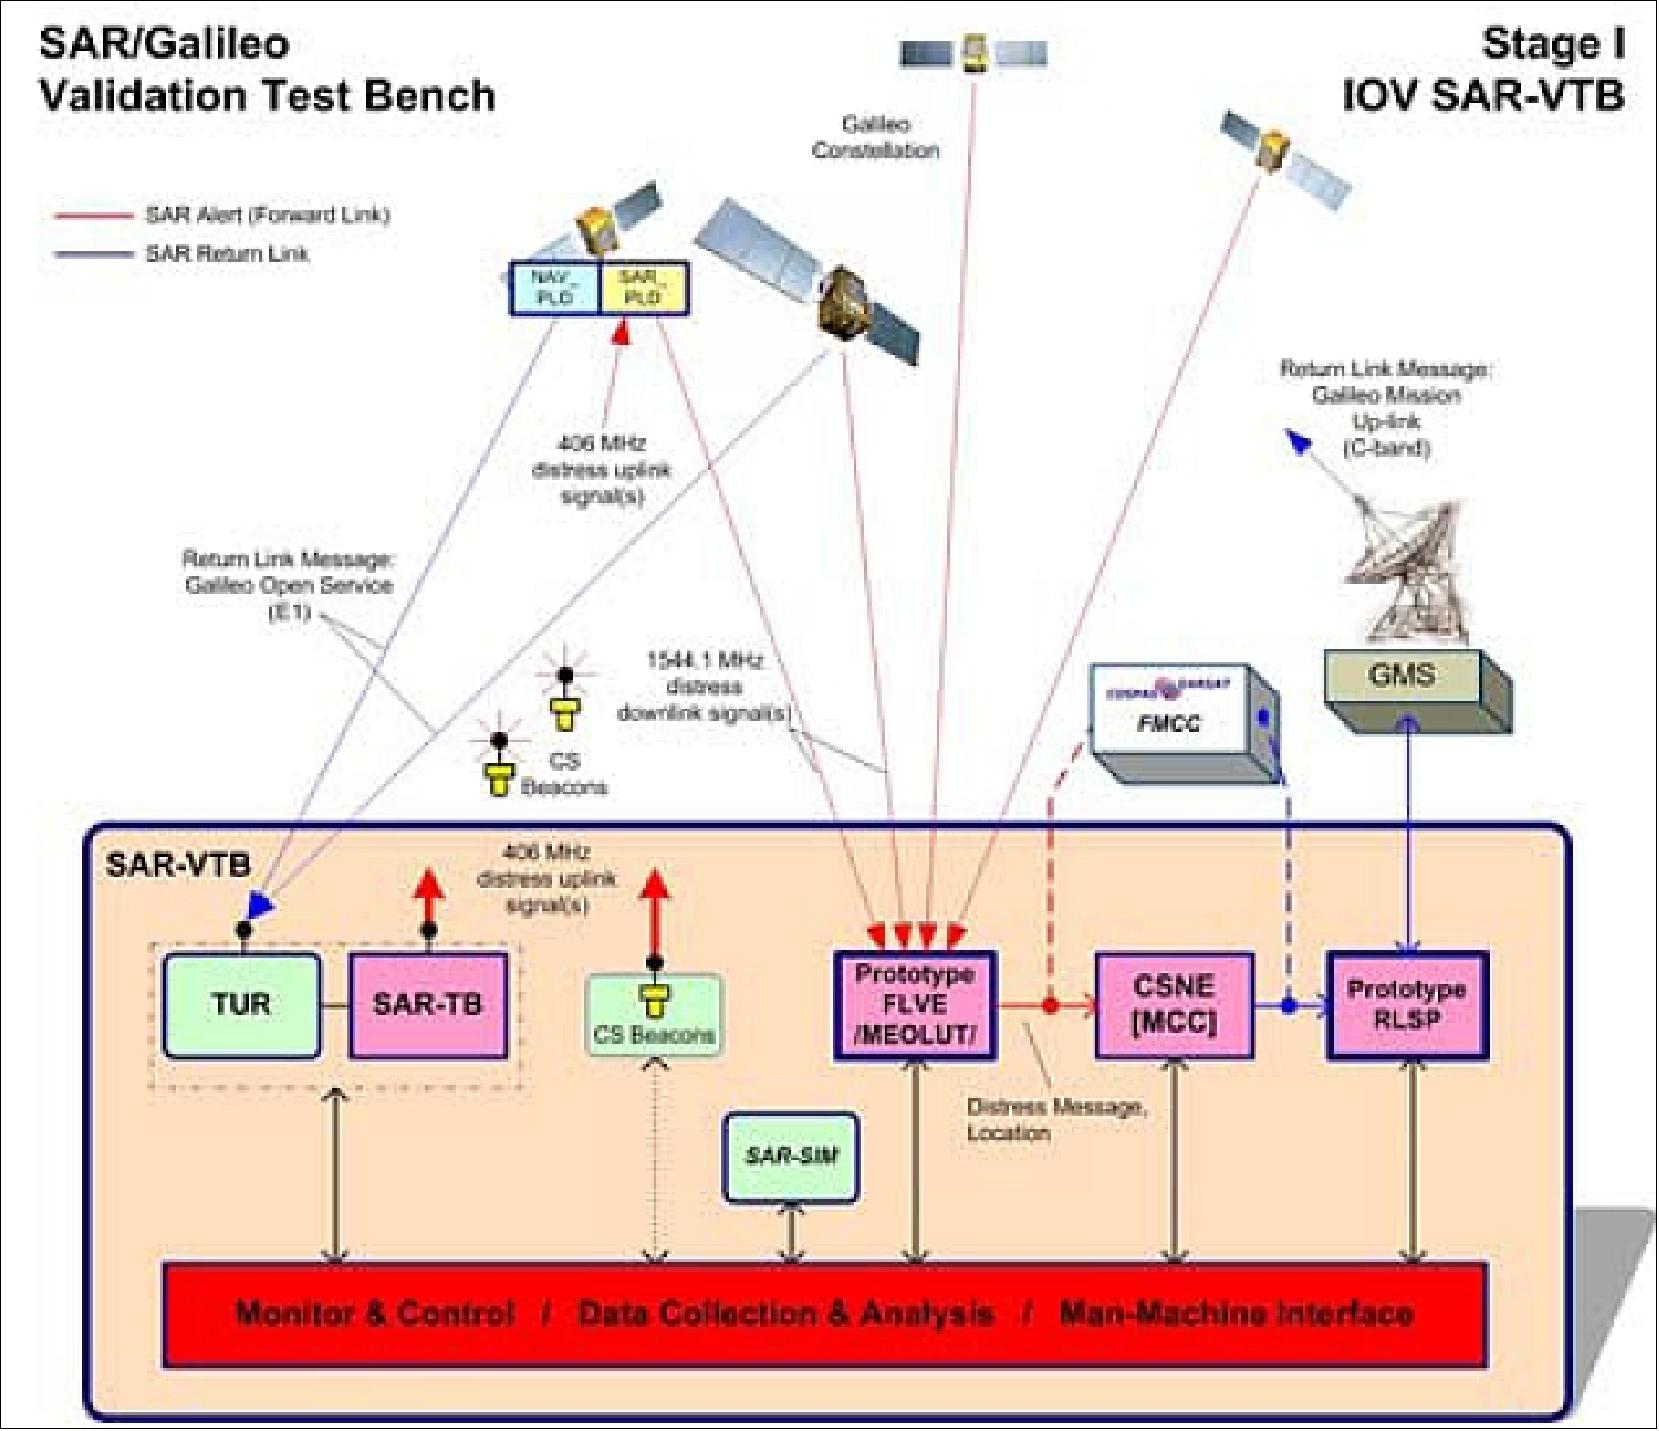 Figure 30: SAR-VTB in the first stage - components and interfaces overview (image credit: ESA)